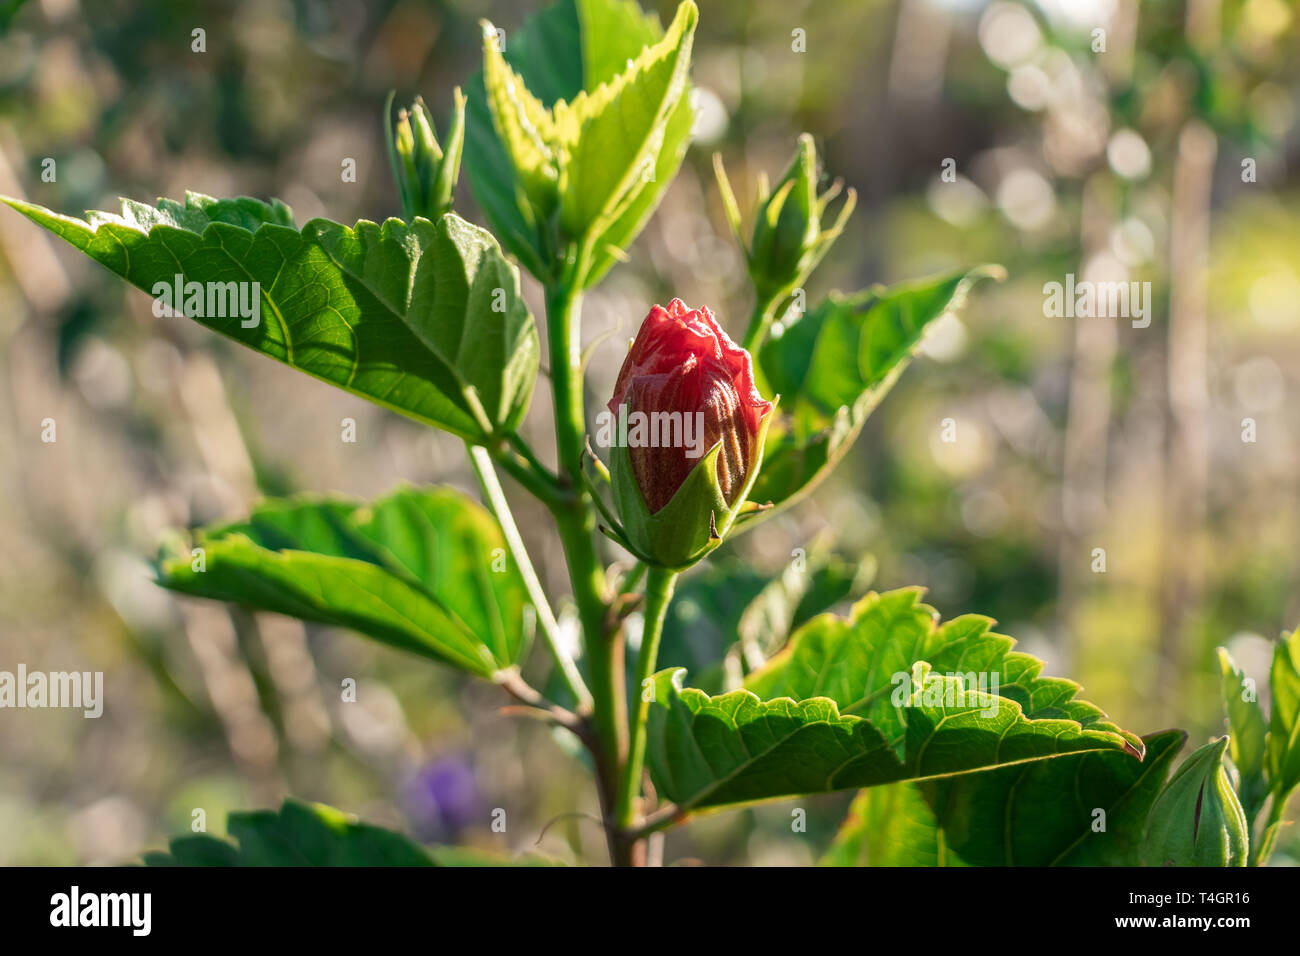 Variety of tropical flowers and plants from the Panamanian rain forest and the highland. Stock Photo